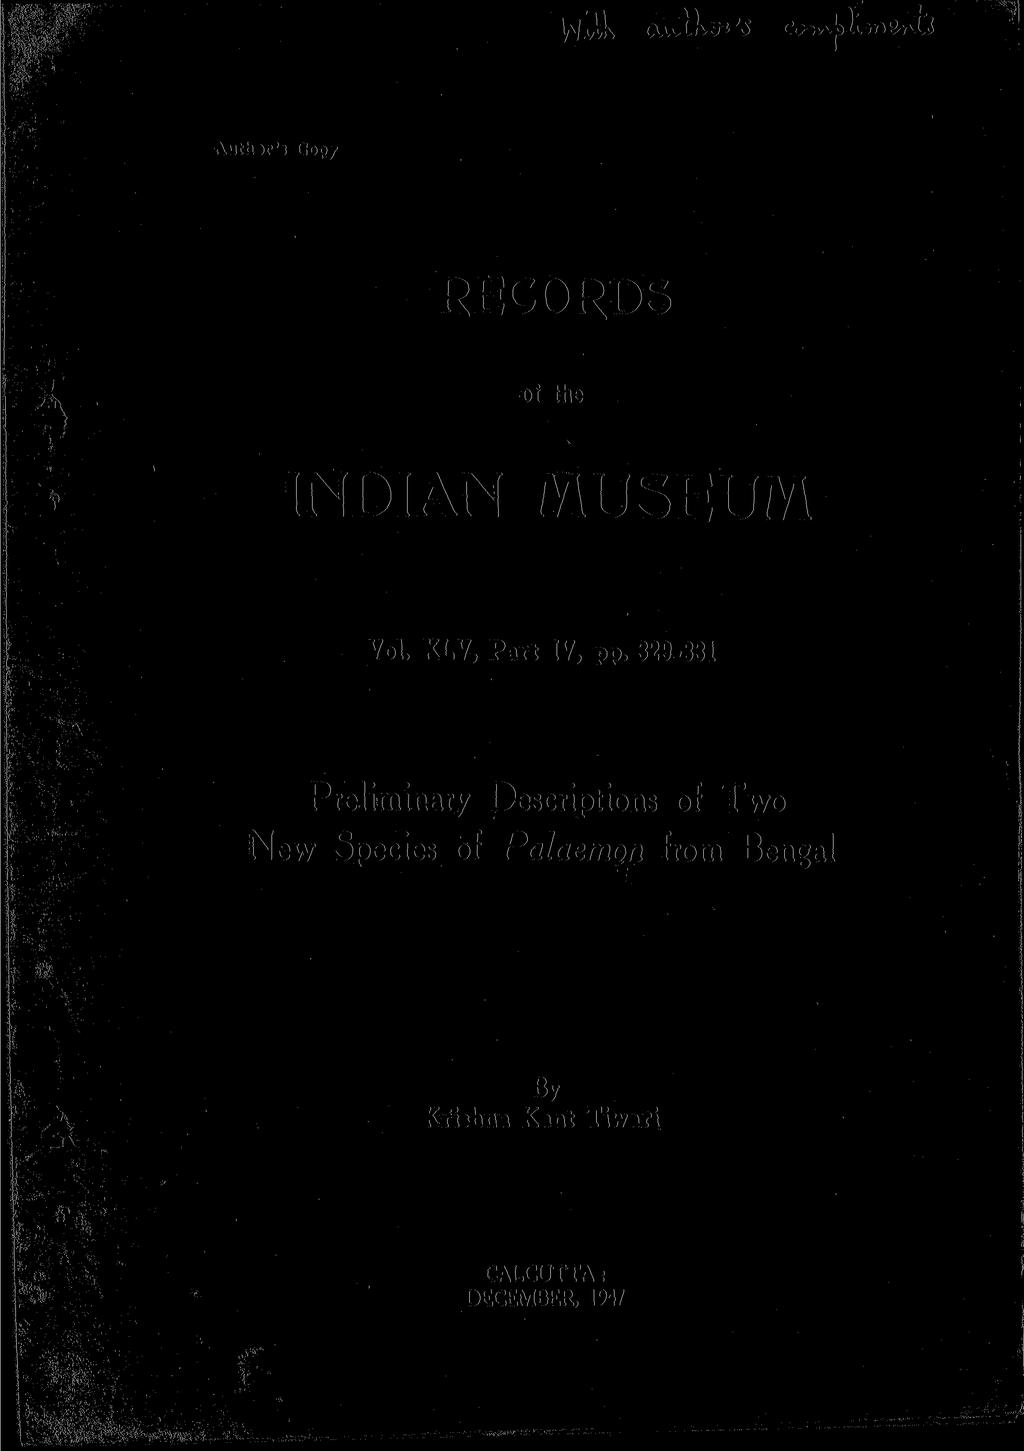 WJWn 's co^ii. Autbcr'a Cop/ RECORDS of the INDIAN MUSEUM Vol. XLV, Part IV, pp.